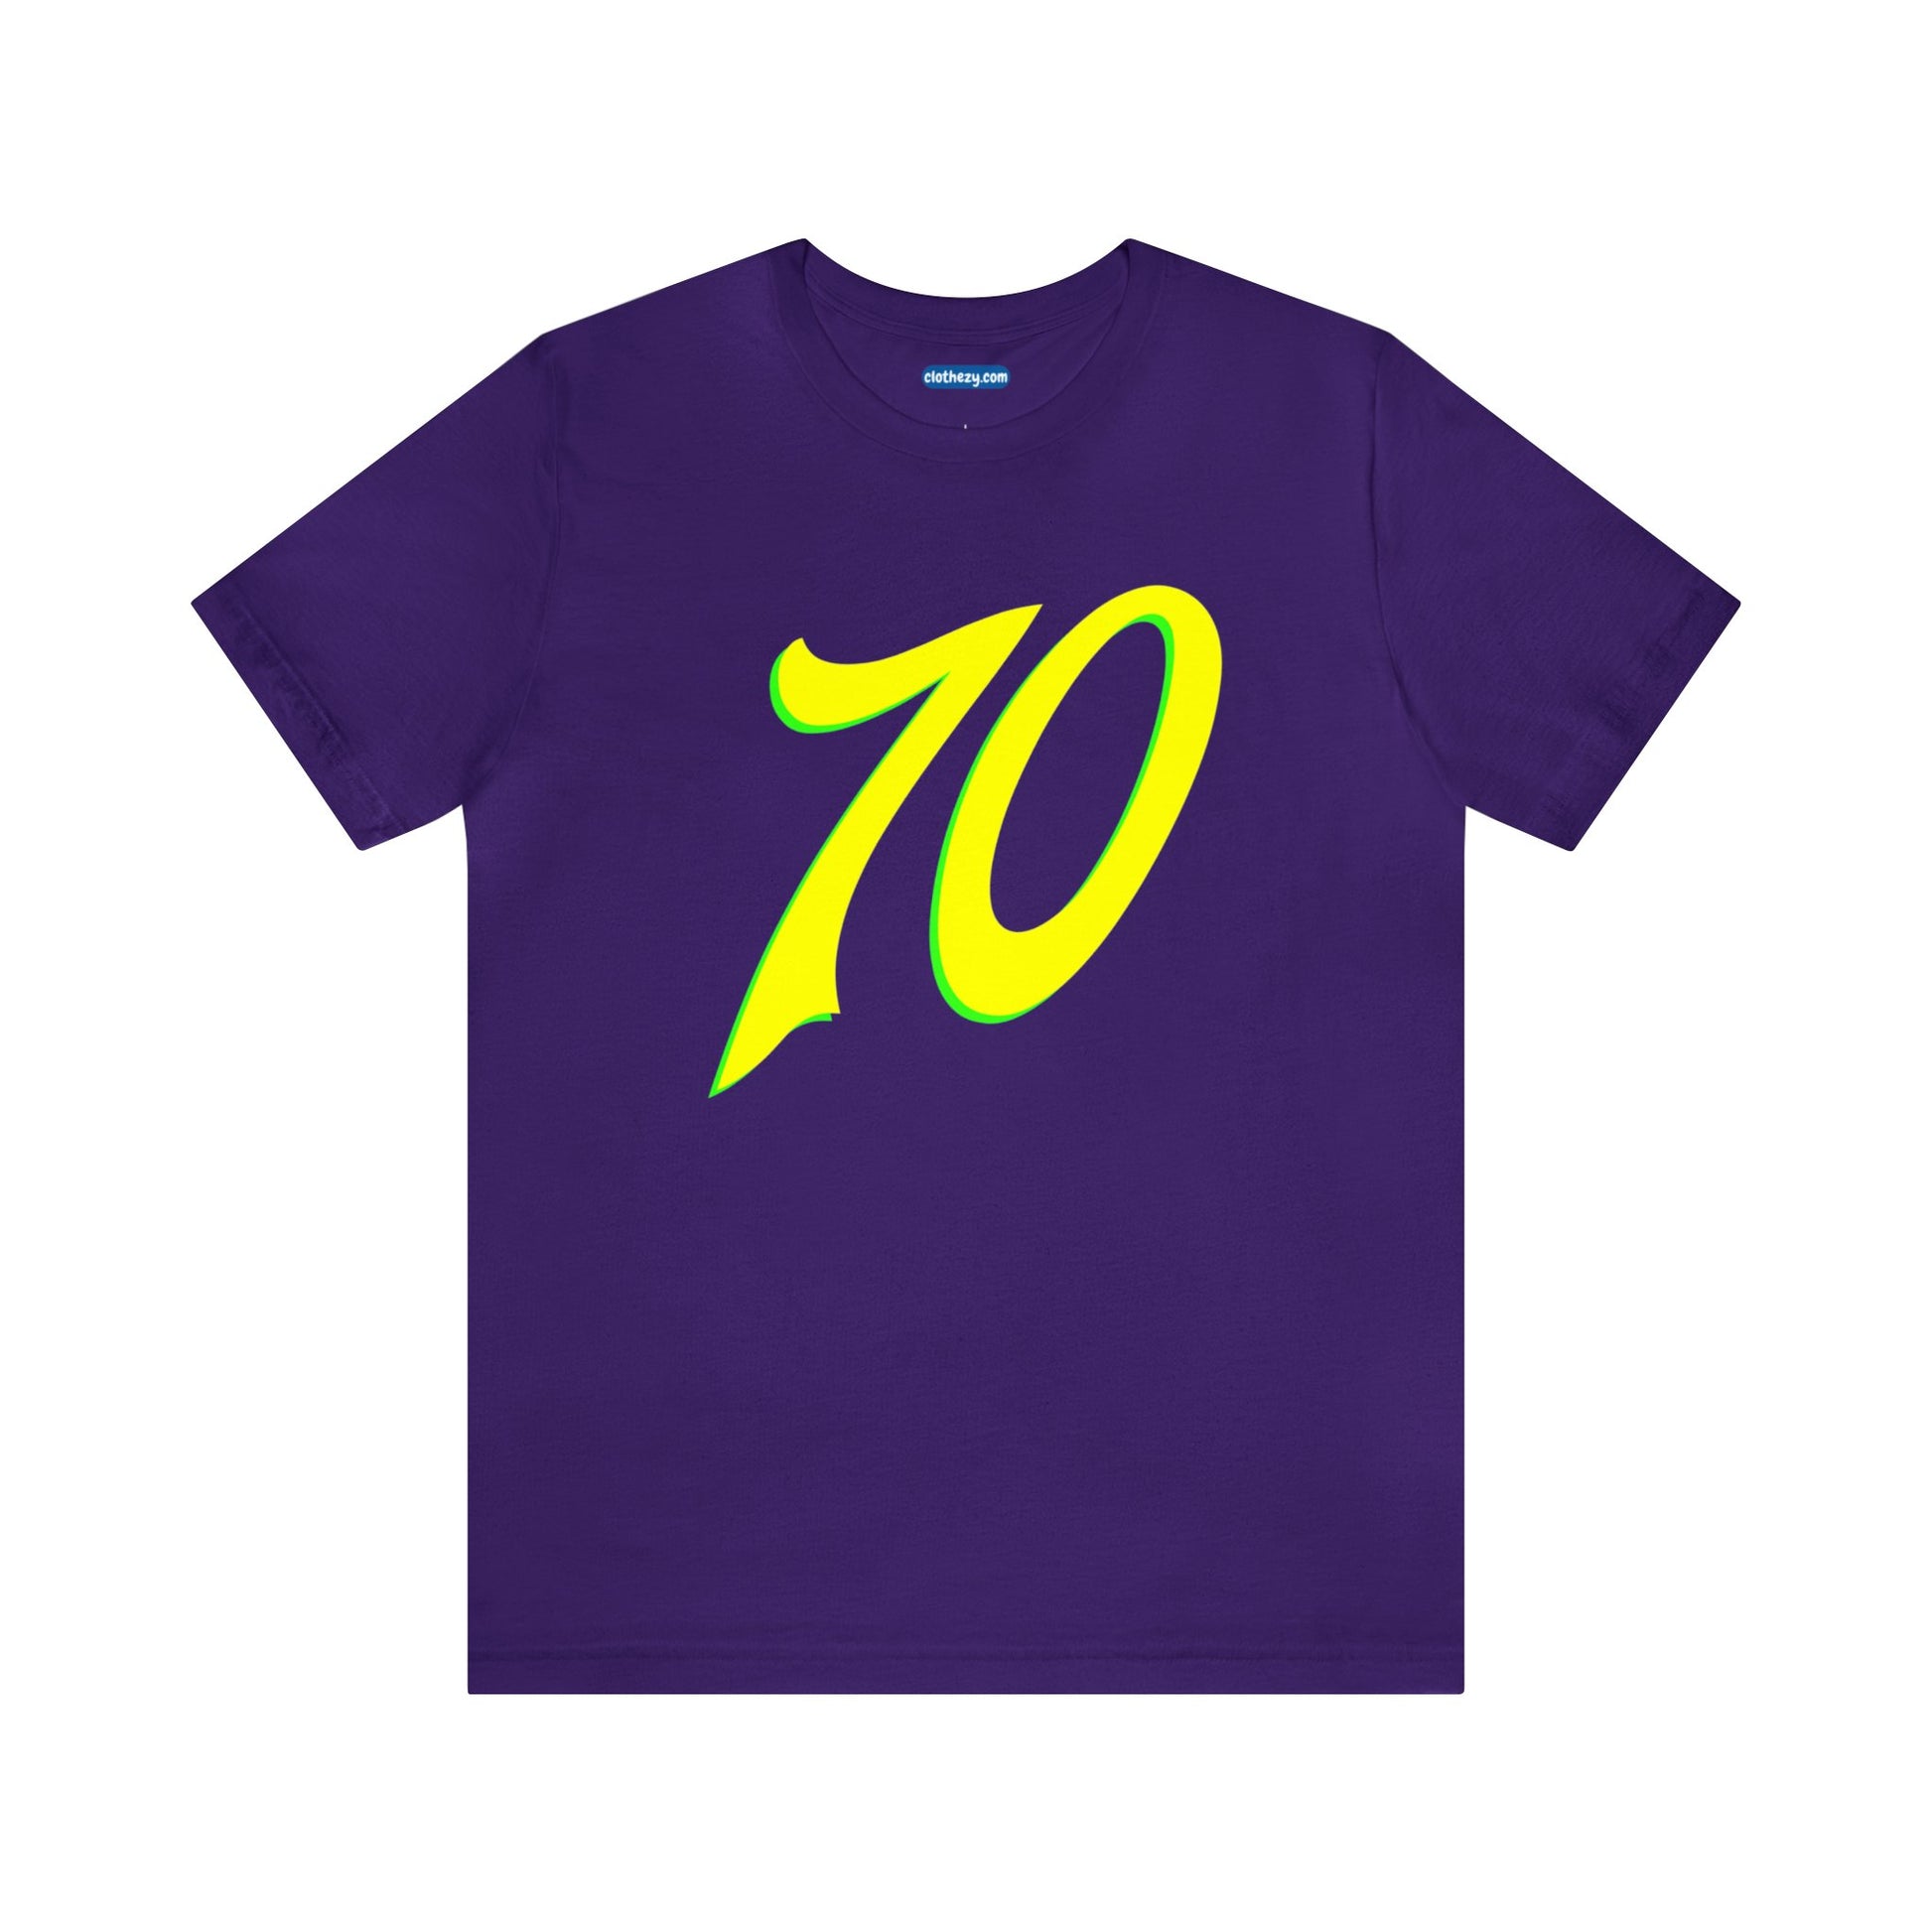 Number 70 Design - Soft Cotton Tee for birthdays and celebrations, Gift for friends and family, Multiple Options by clothezy.com in Royal Blue Size Small - Buy Now